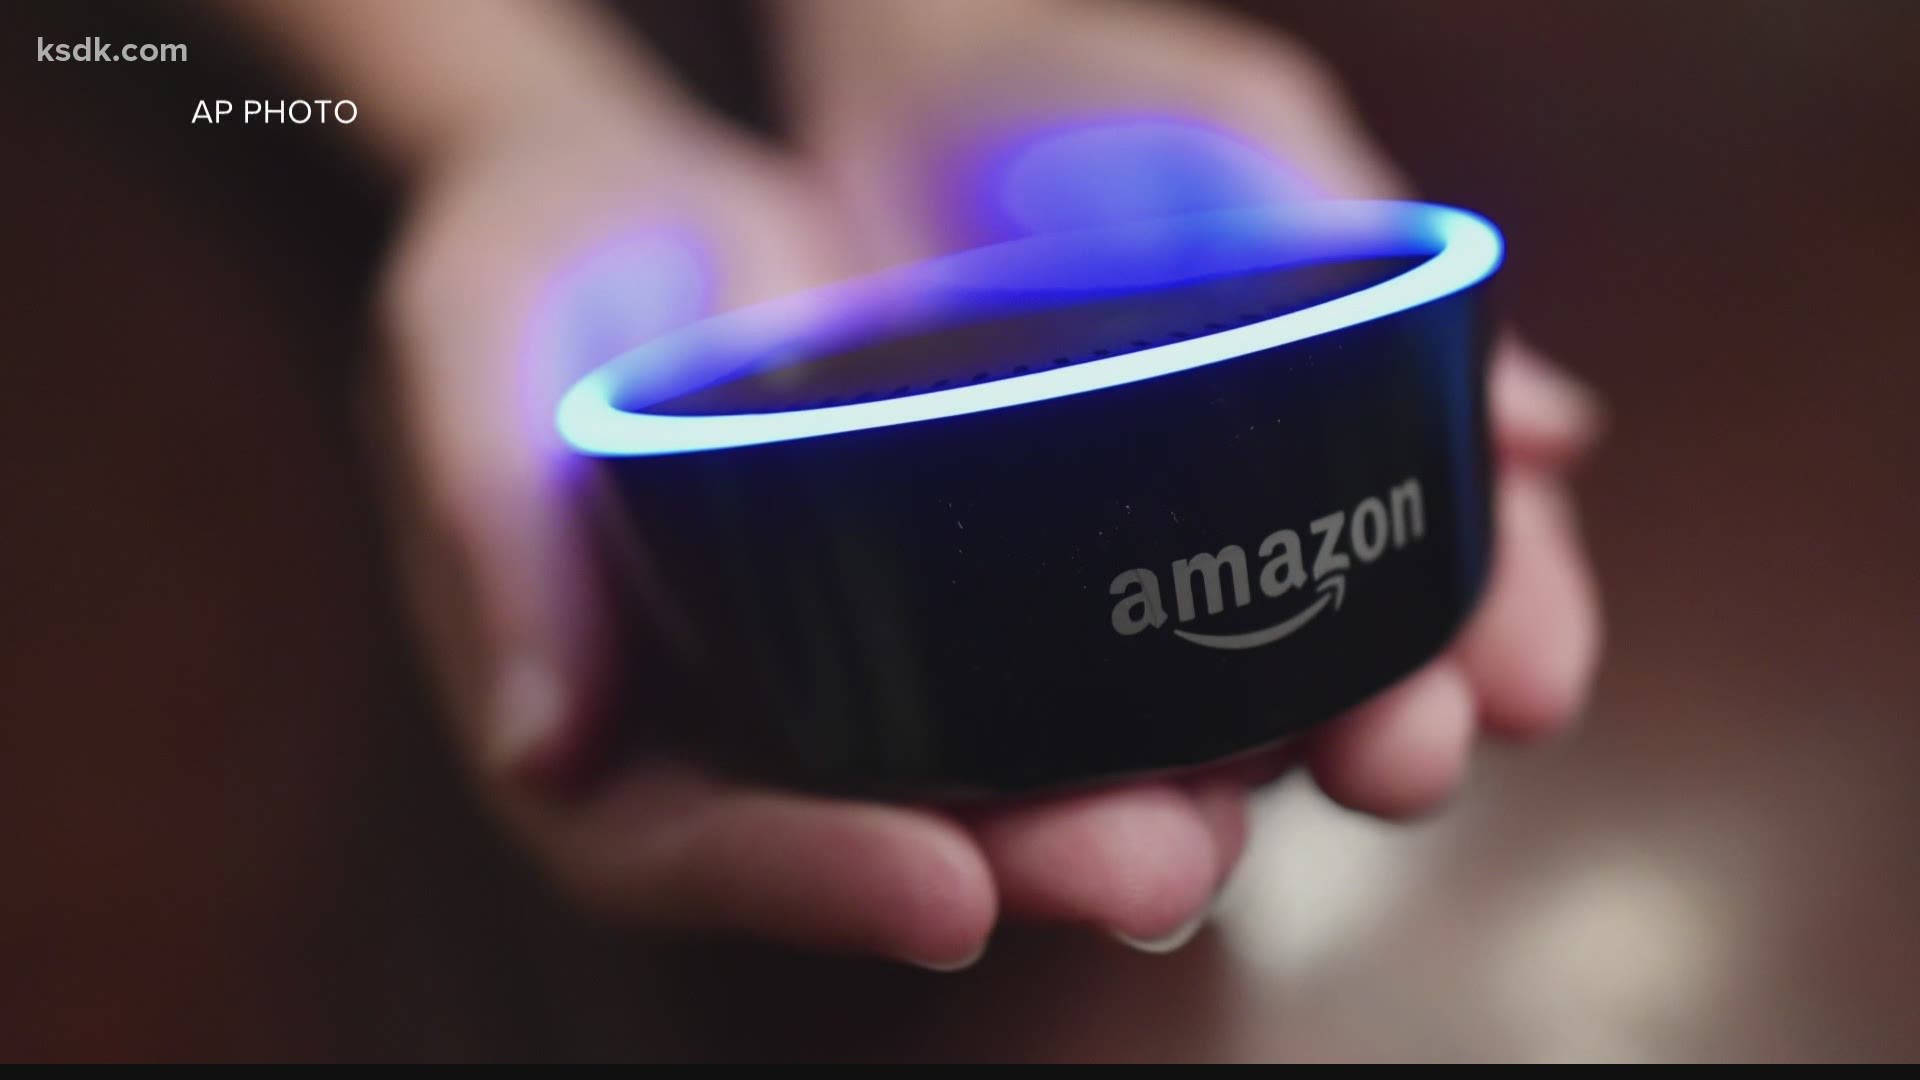 If you have any Amazon or Ring devices, Amazon will start sharing your WiFi with your neighbors on June 8. Everyone is automatically enrolled.